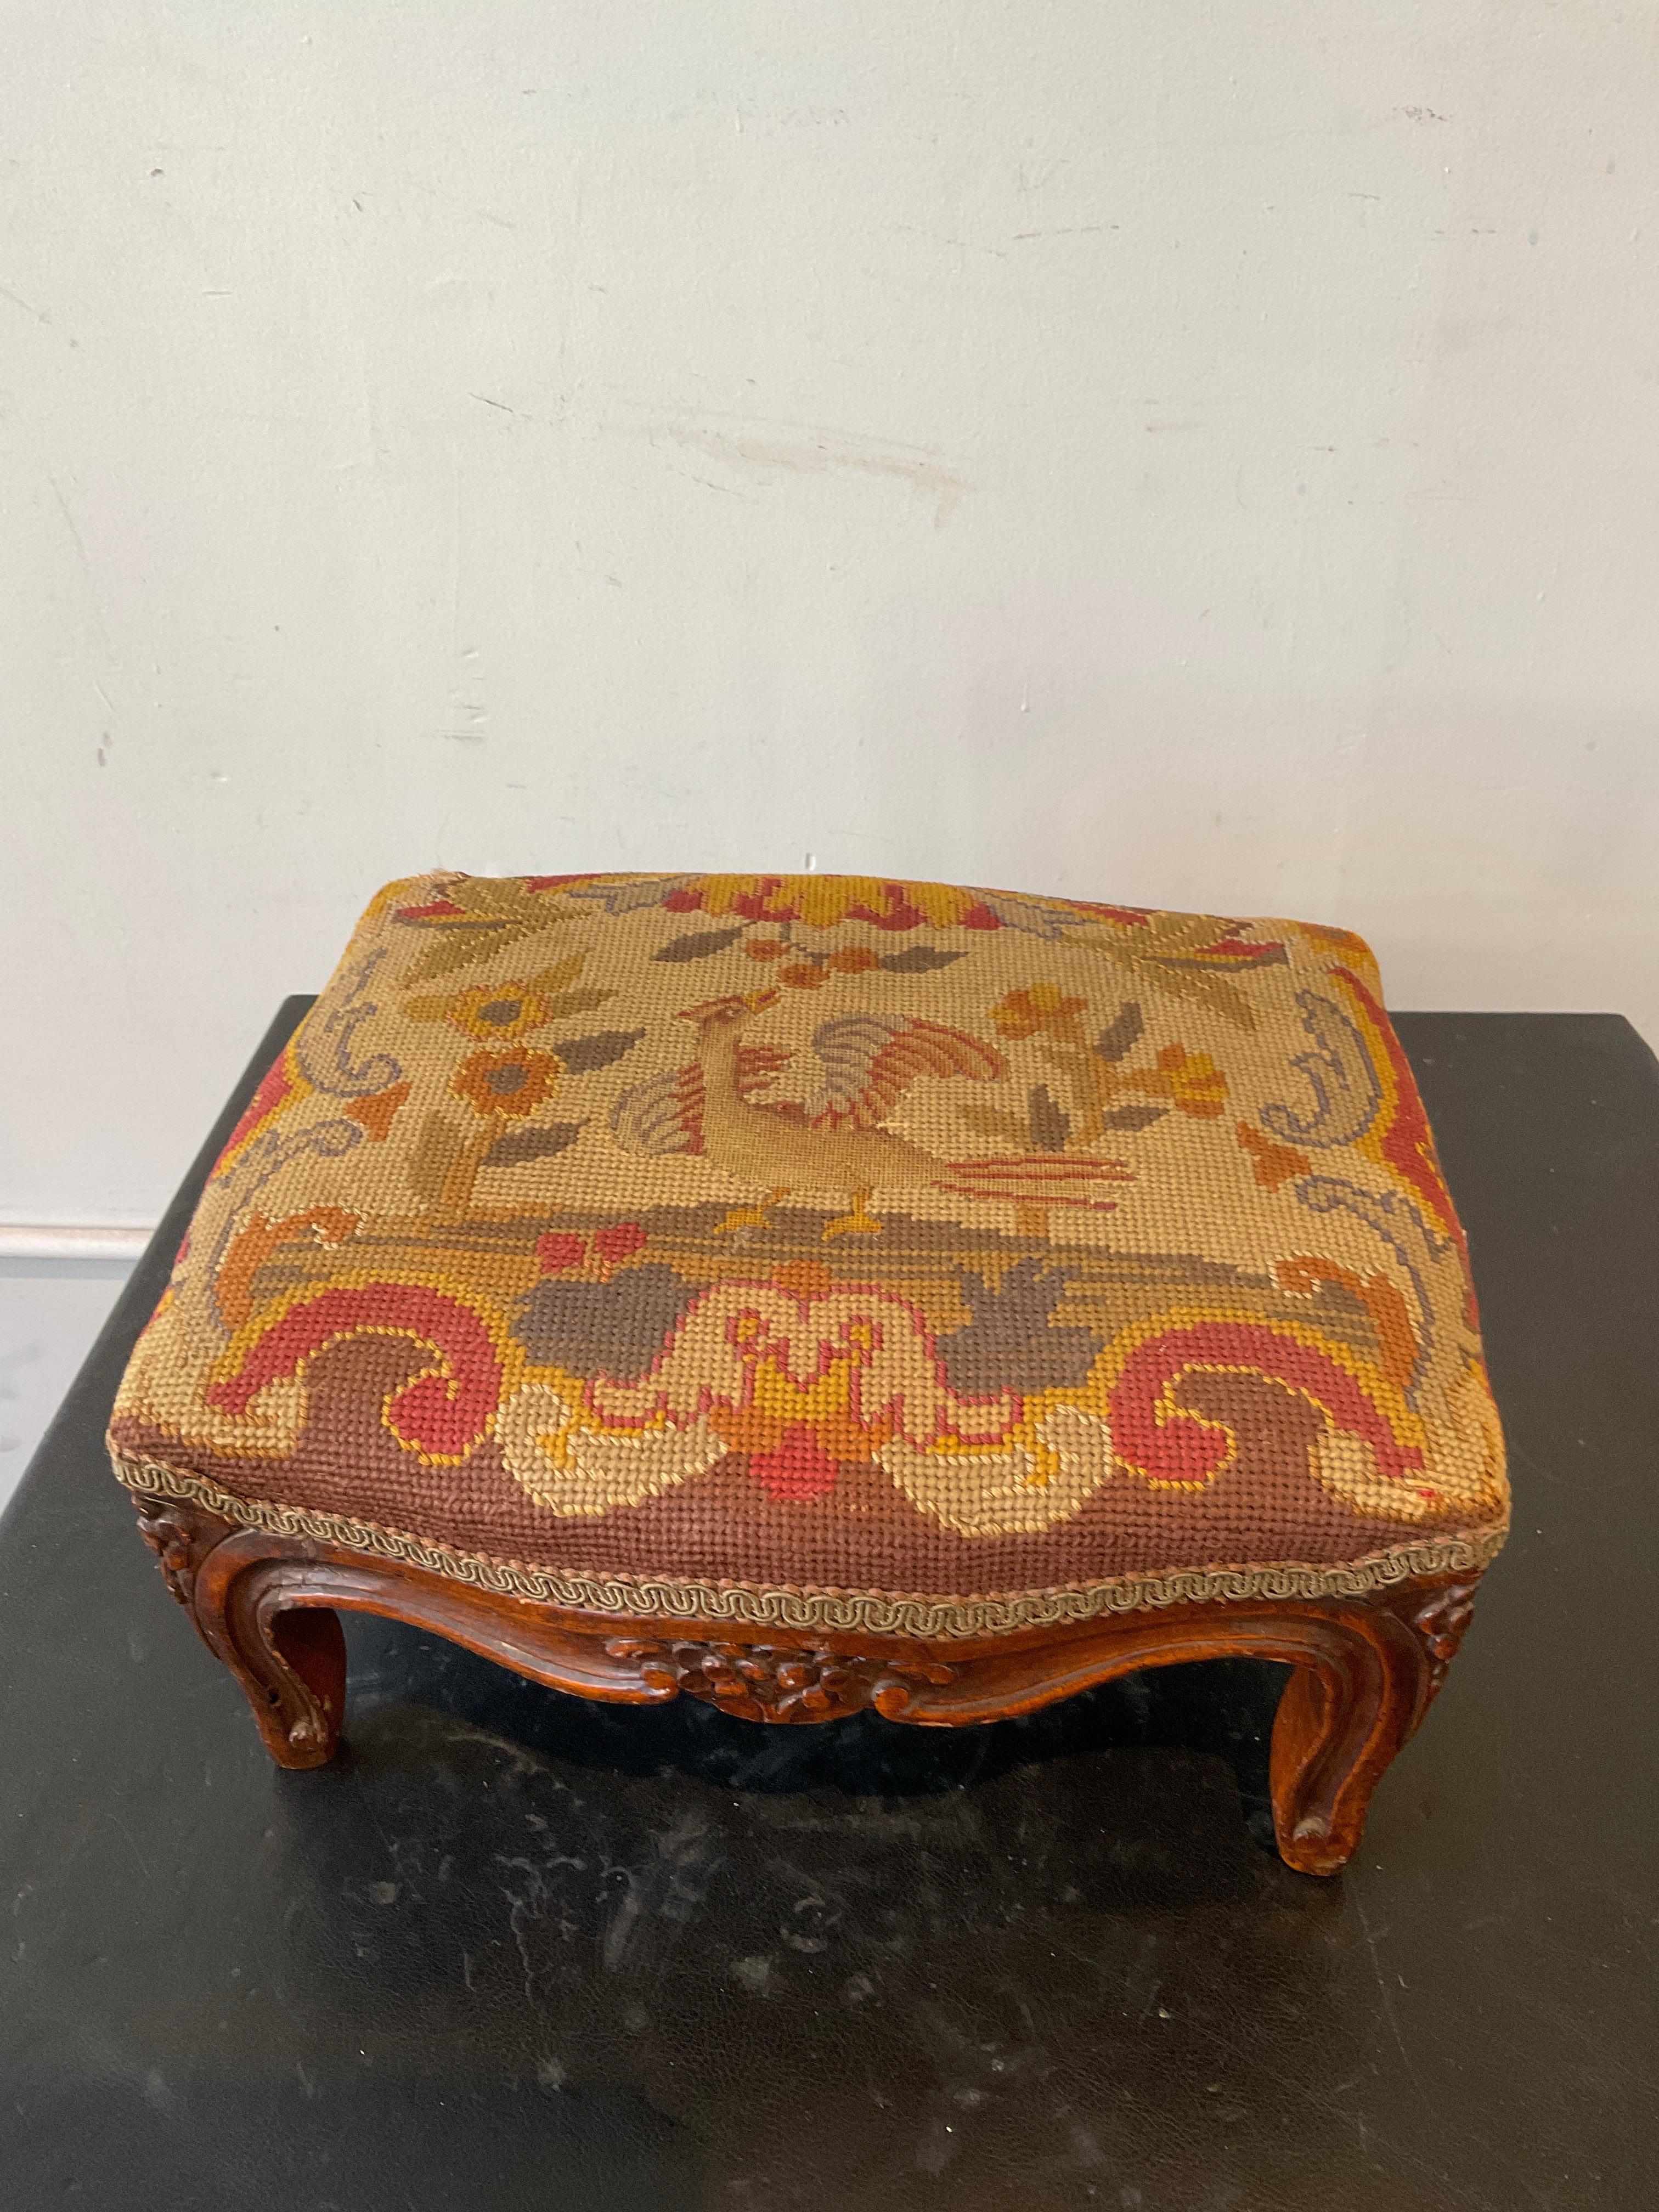 1910 French hand carved wood footstool with needlepoint top. Small tear in fabric as shown in 8th picture.